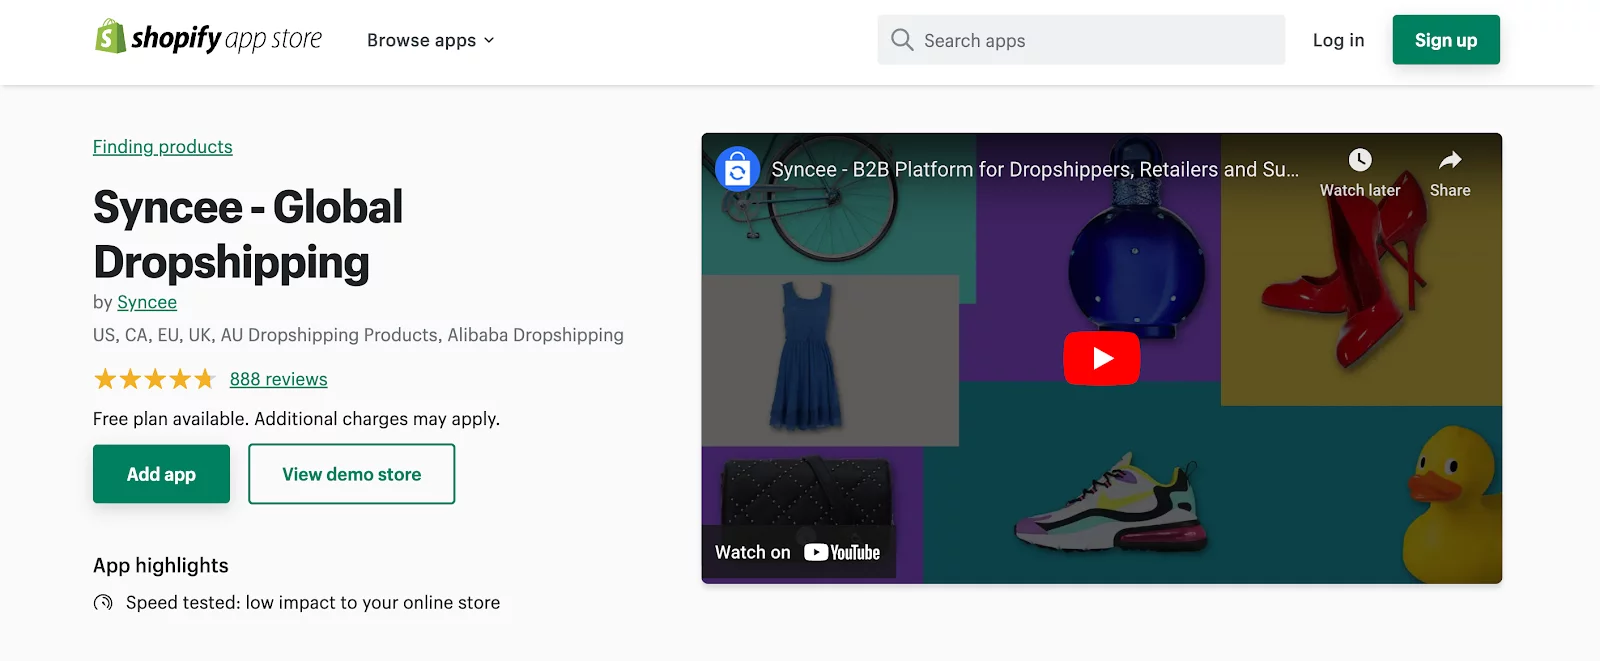 Shopify Apps for Dropshipping - Syncee Global Dropshipping